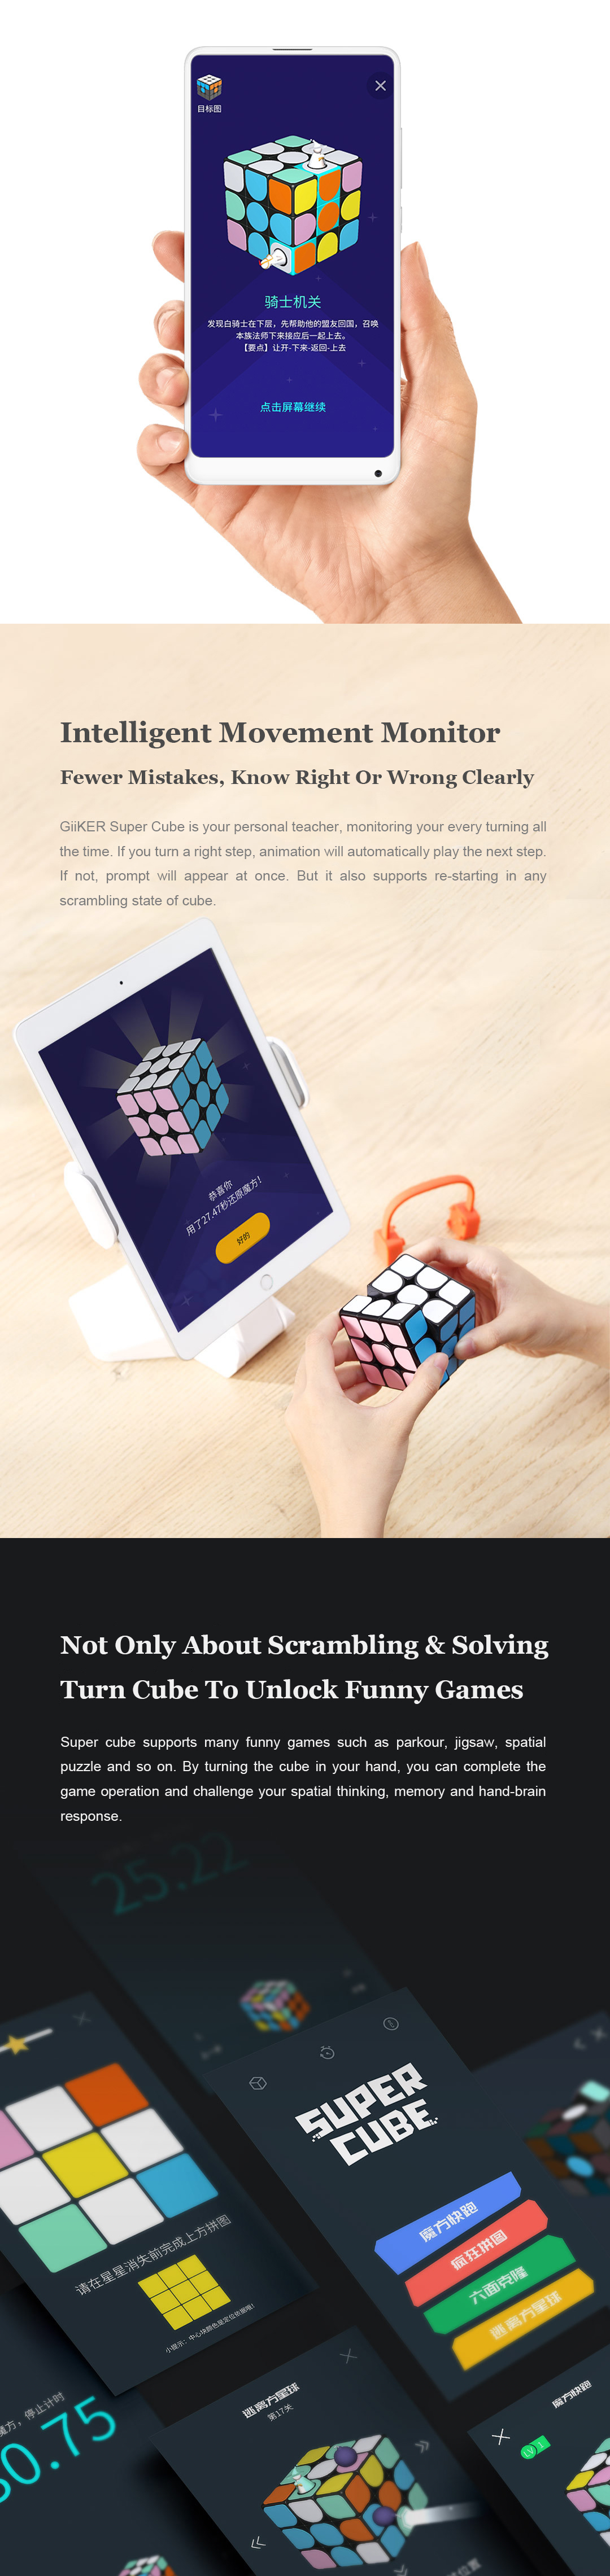 Xiaomi Giiker Super Square Magic Cube Smart App Real-time Synchronization Science Education Toy Gift 81